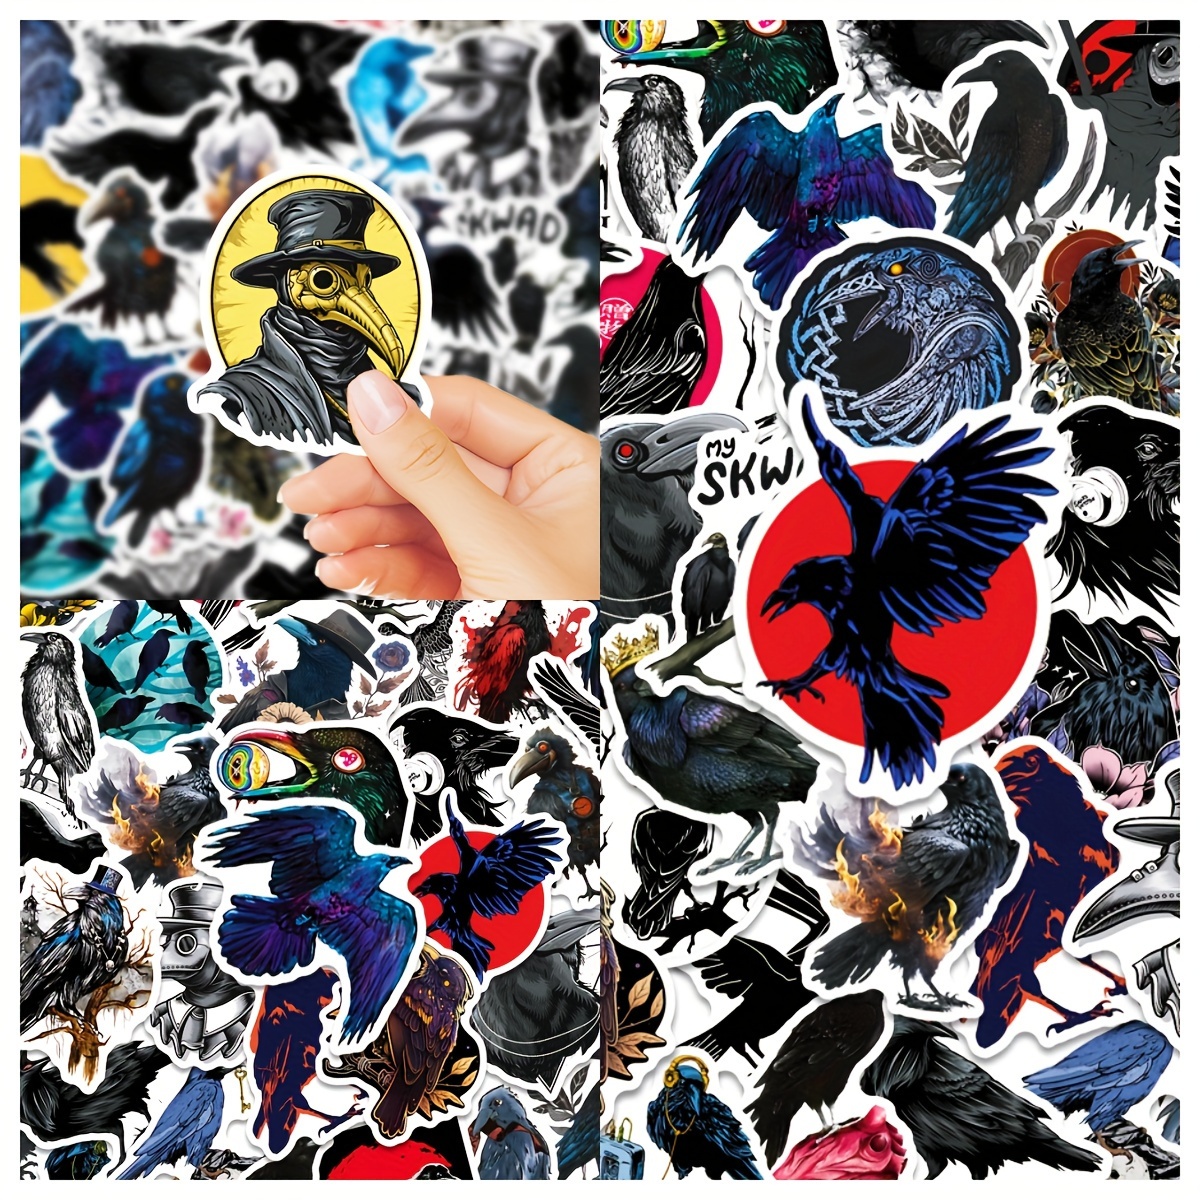 52pcs Cartoon Horror Eyeball Stickers Mobile Phone Case Laptop Water Cup  Skateboard DIY Personality Decoration Stickers